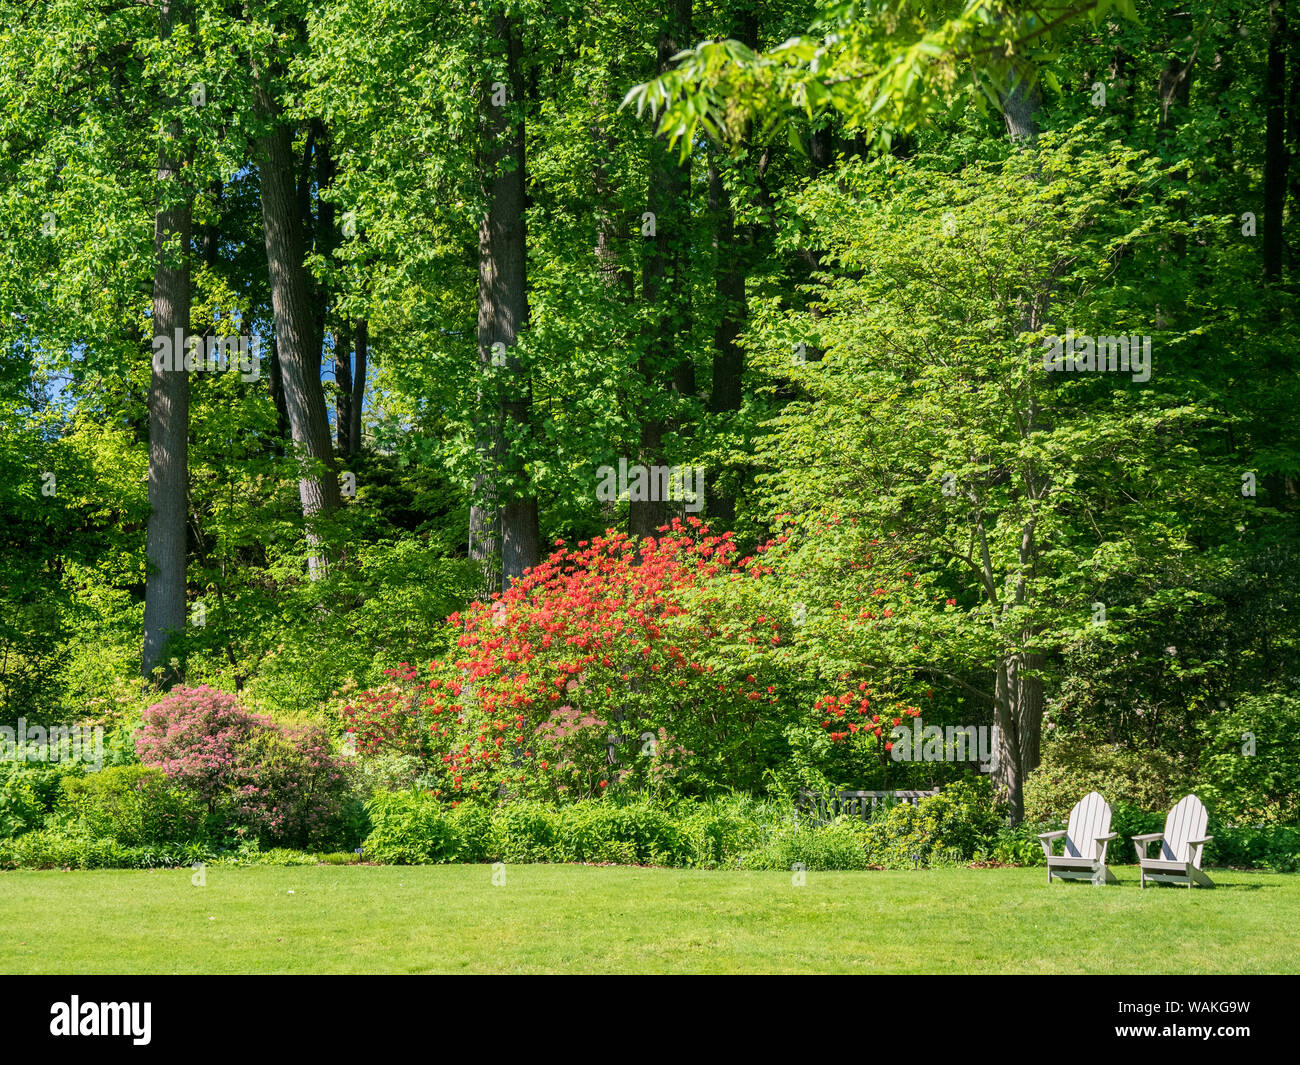 USA, Pennsylvania. Two chairs and flowering shrub in a park. Stock Photo